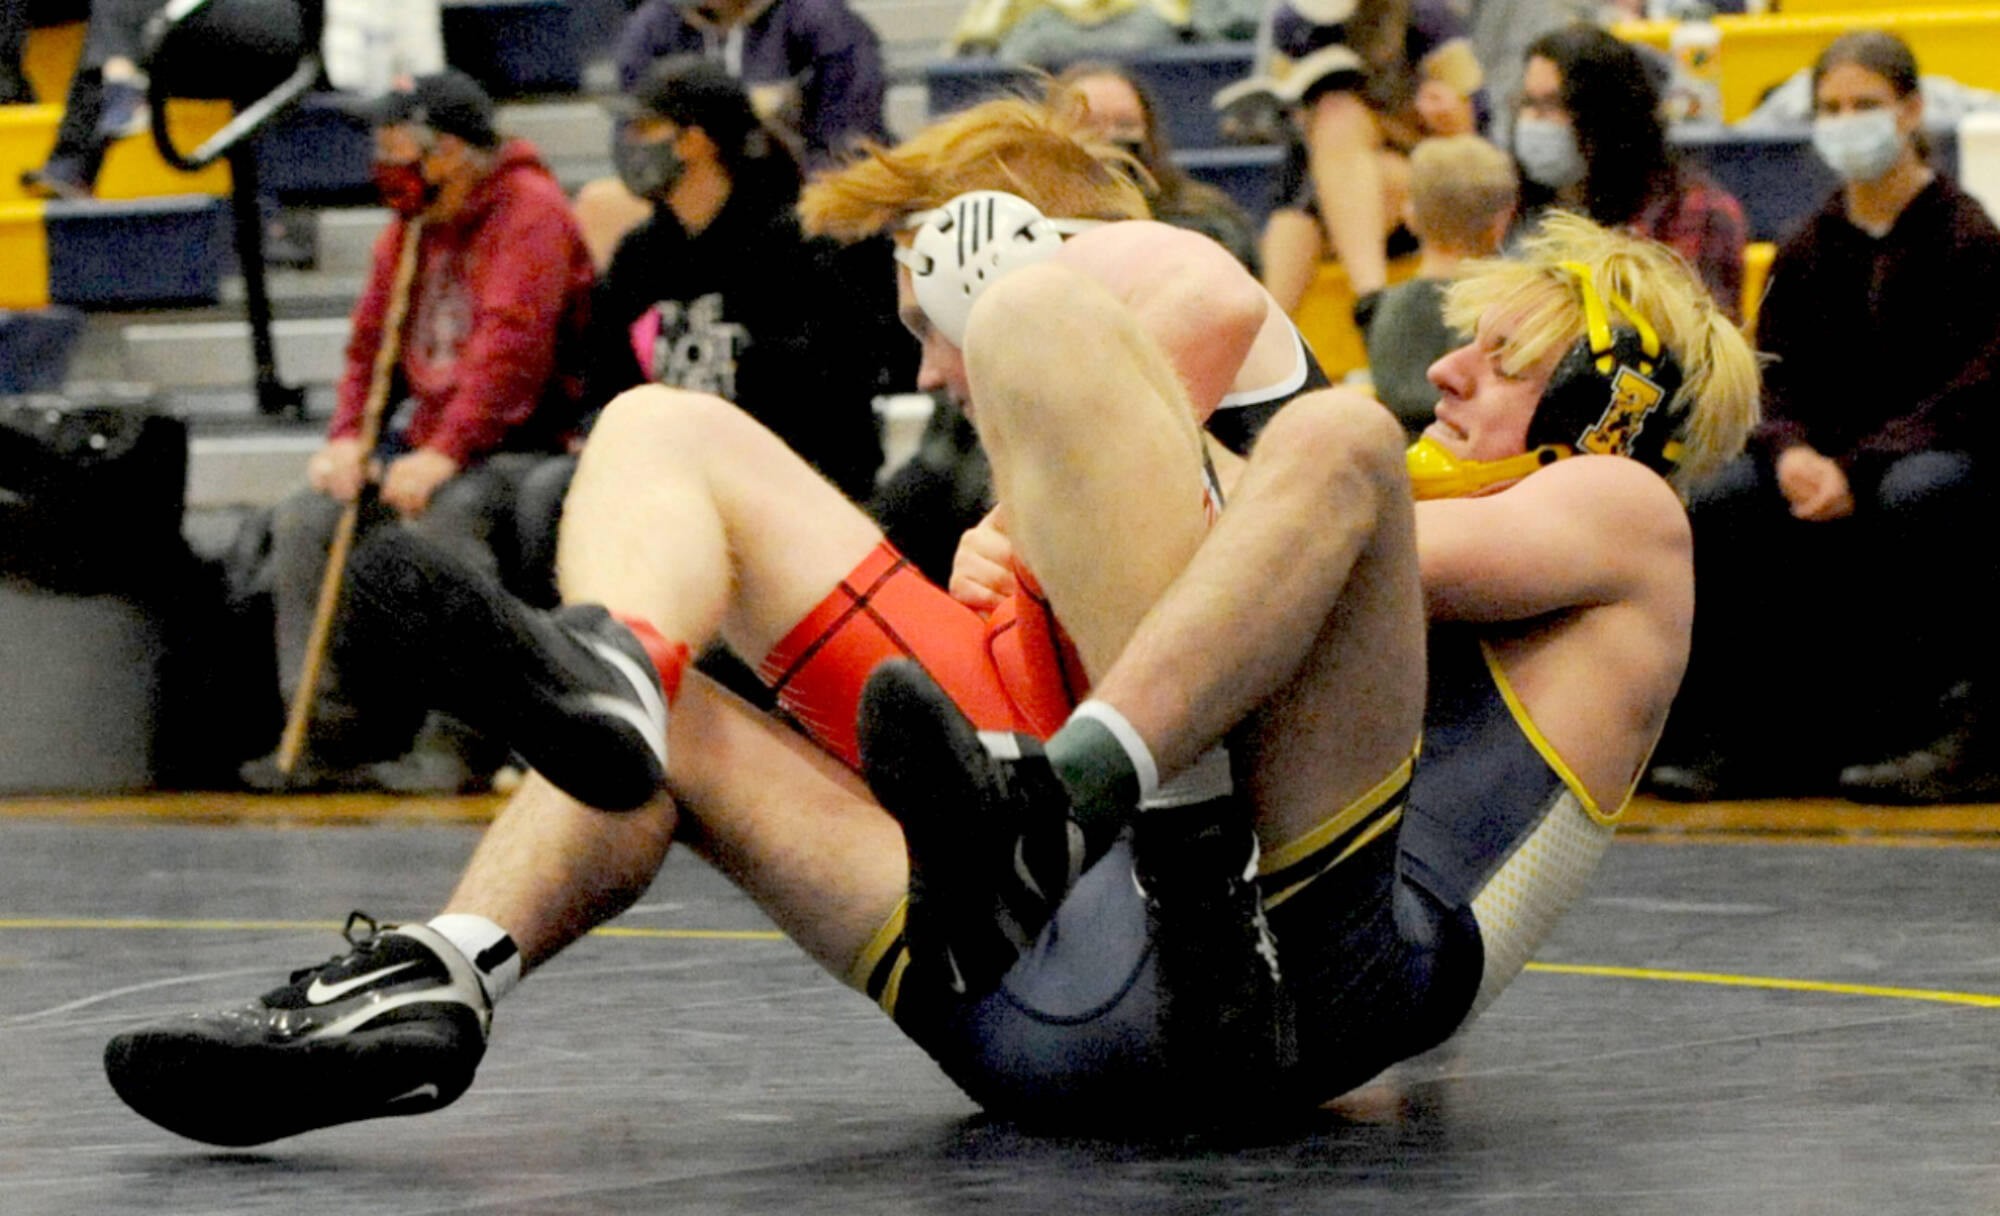 Forks' Jake Weakley, right, pinned East Jefferson's Gabe Evans in the 160-pound class during the Forks Wrestling Invitational held Saturday in the Spartan Gym. (Lonnie Archibald/for Peninsula Daily News)